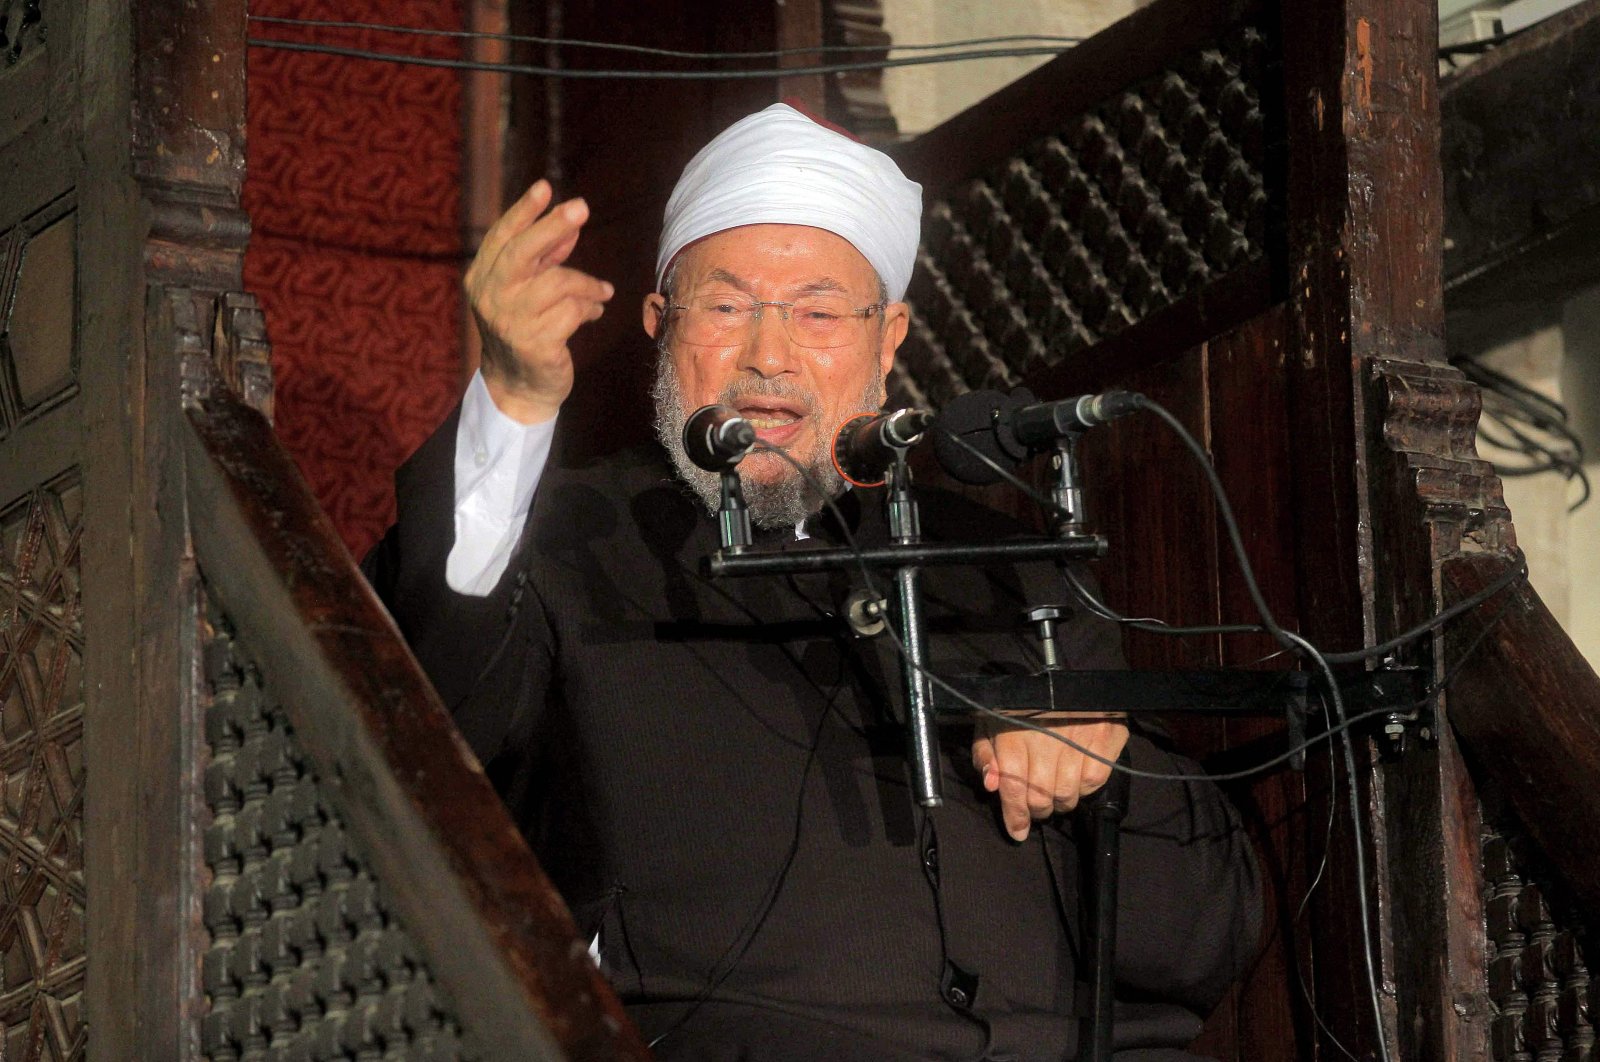 Famed Egyptian cleric Youssef al-Qaradawi dies in exile at 96